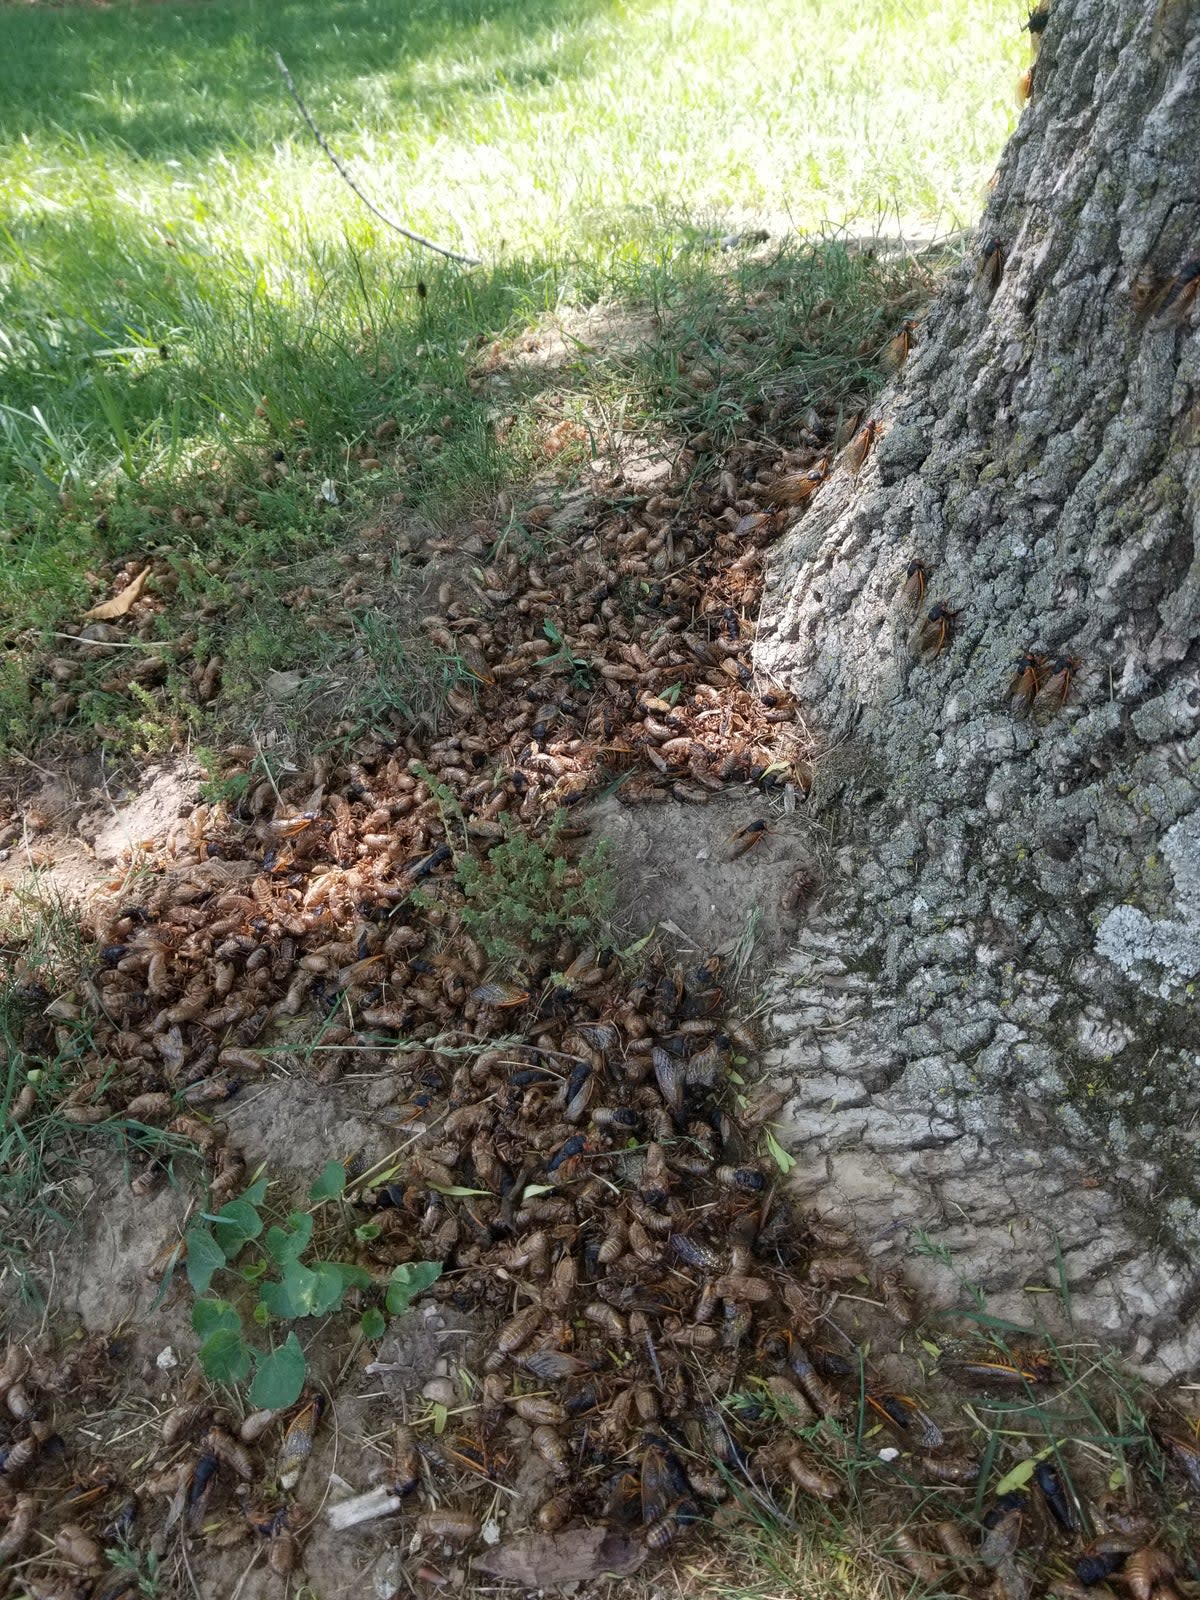 A pile of cicadas in Bloomington, Indiana in 2021. Entomologists are eager to study two broods of cicadas co-emerging this spring for the first time in more than 200 years (Courtesy of Katie Dana)